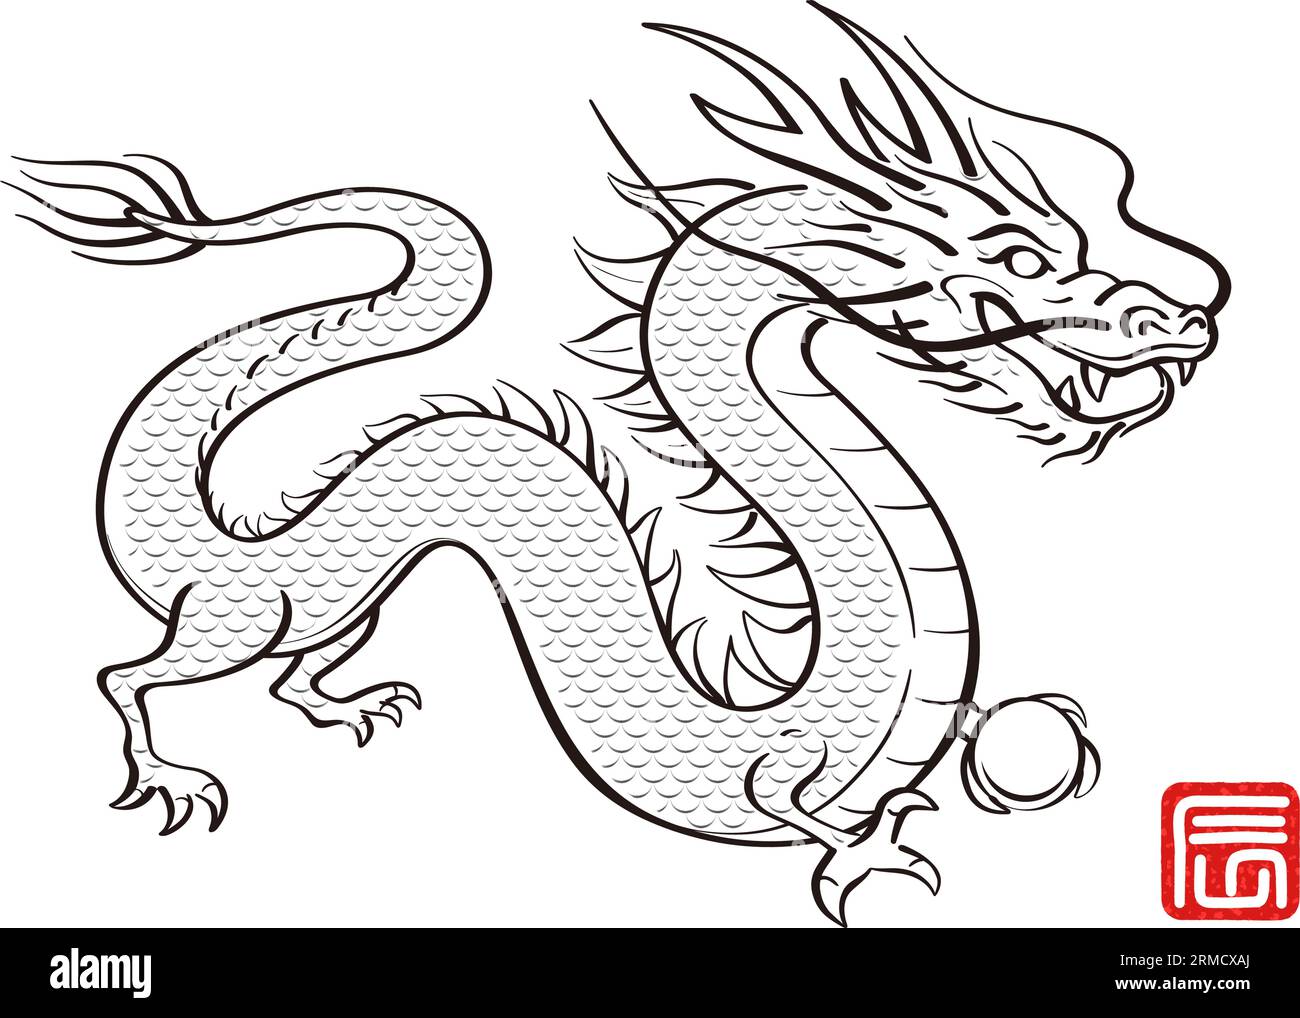 The Year Of The Dragon Vector Zodiac Symbol Illustration Isolated On A White Background. Stock Vector